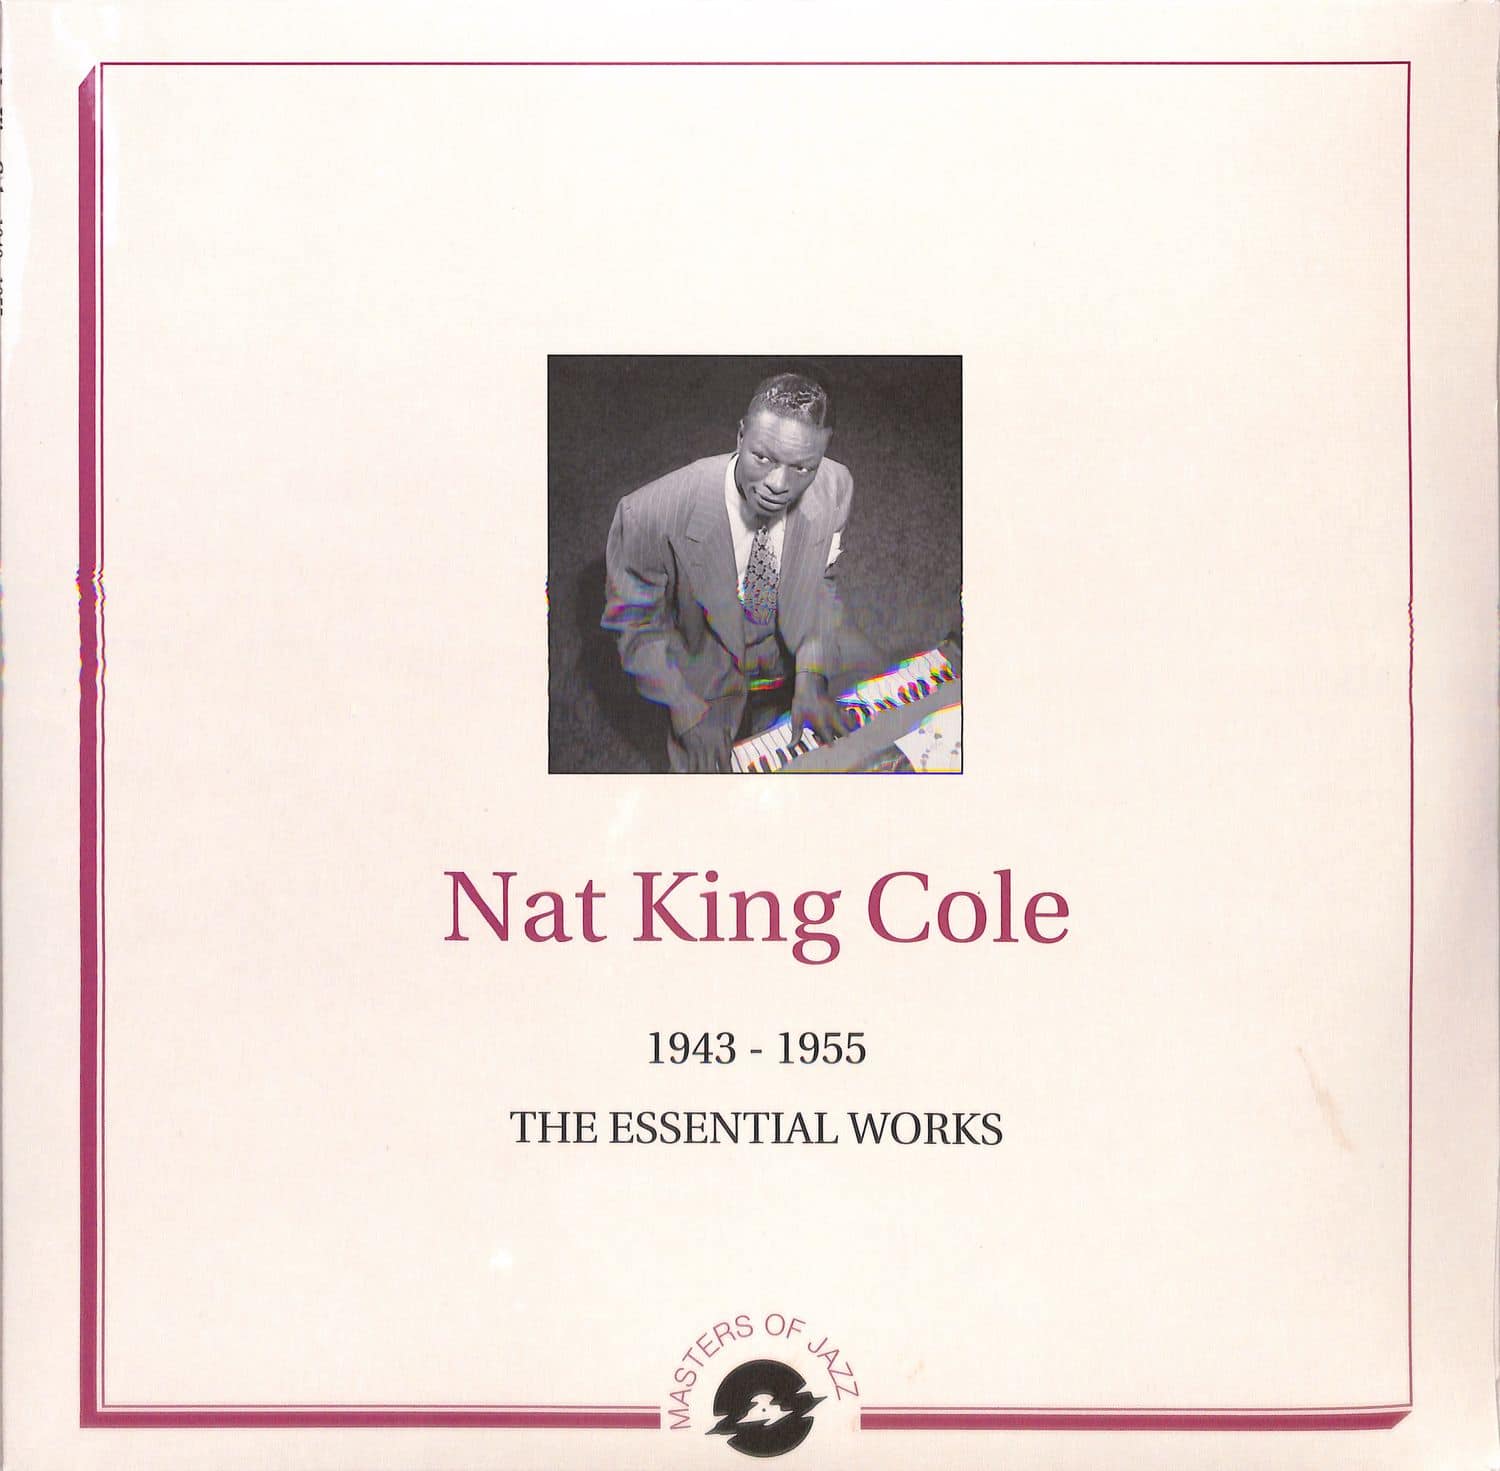 Nat King Cole - THE ESSENTIAL WORKS 1943-1955 